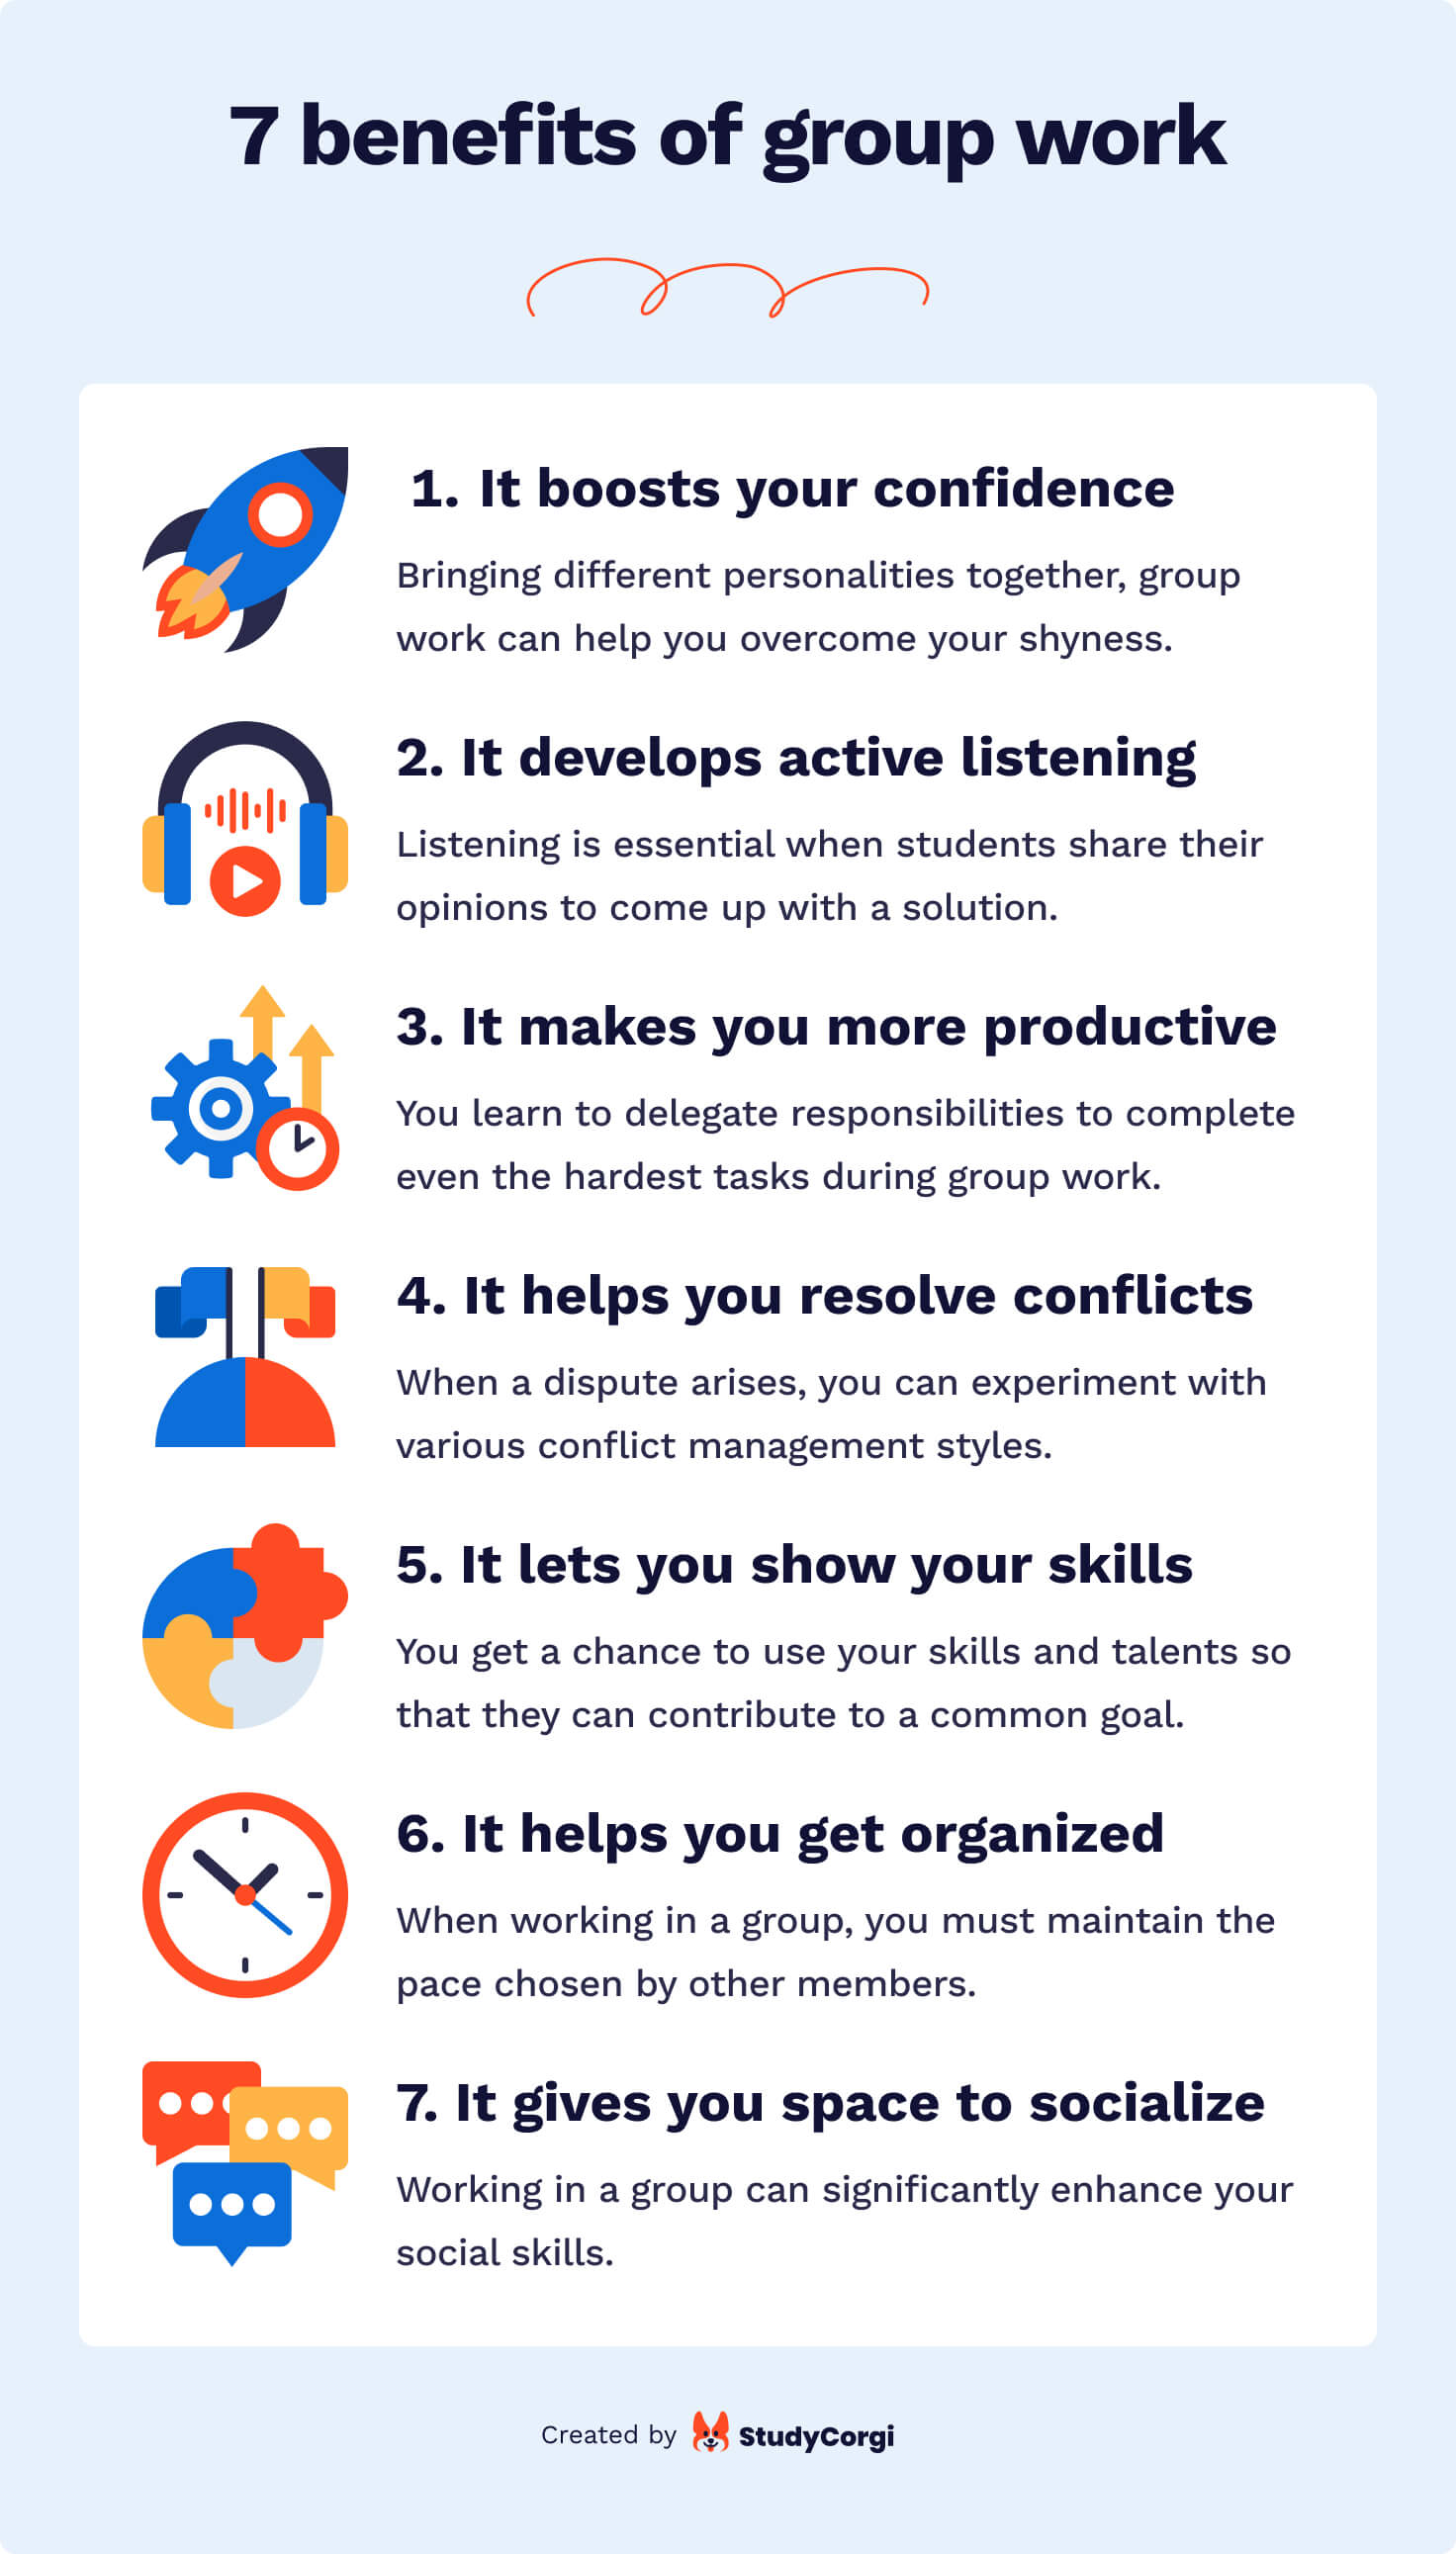 The picture lists the benefits of group work.